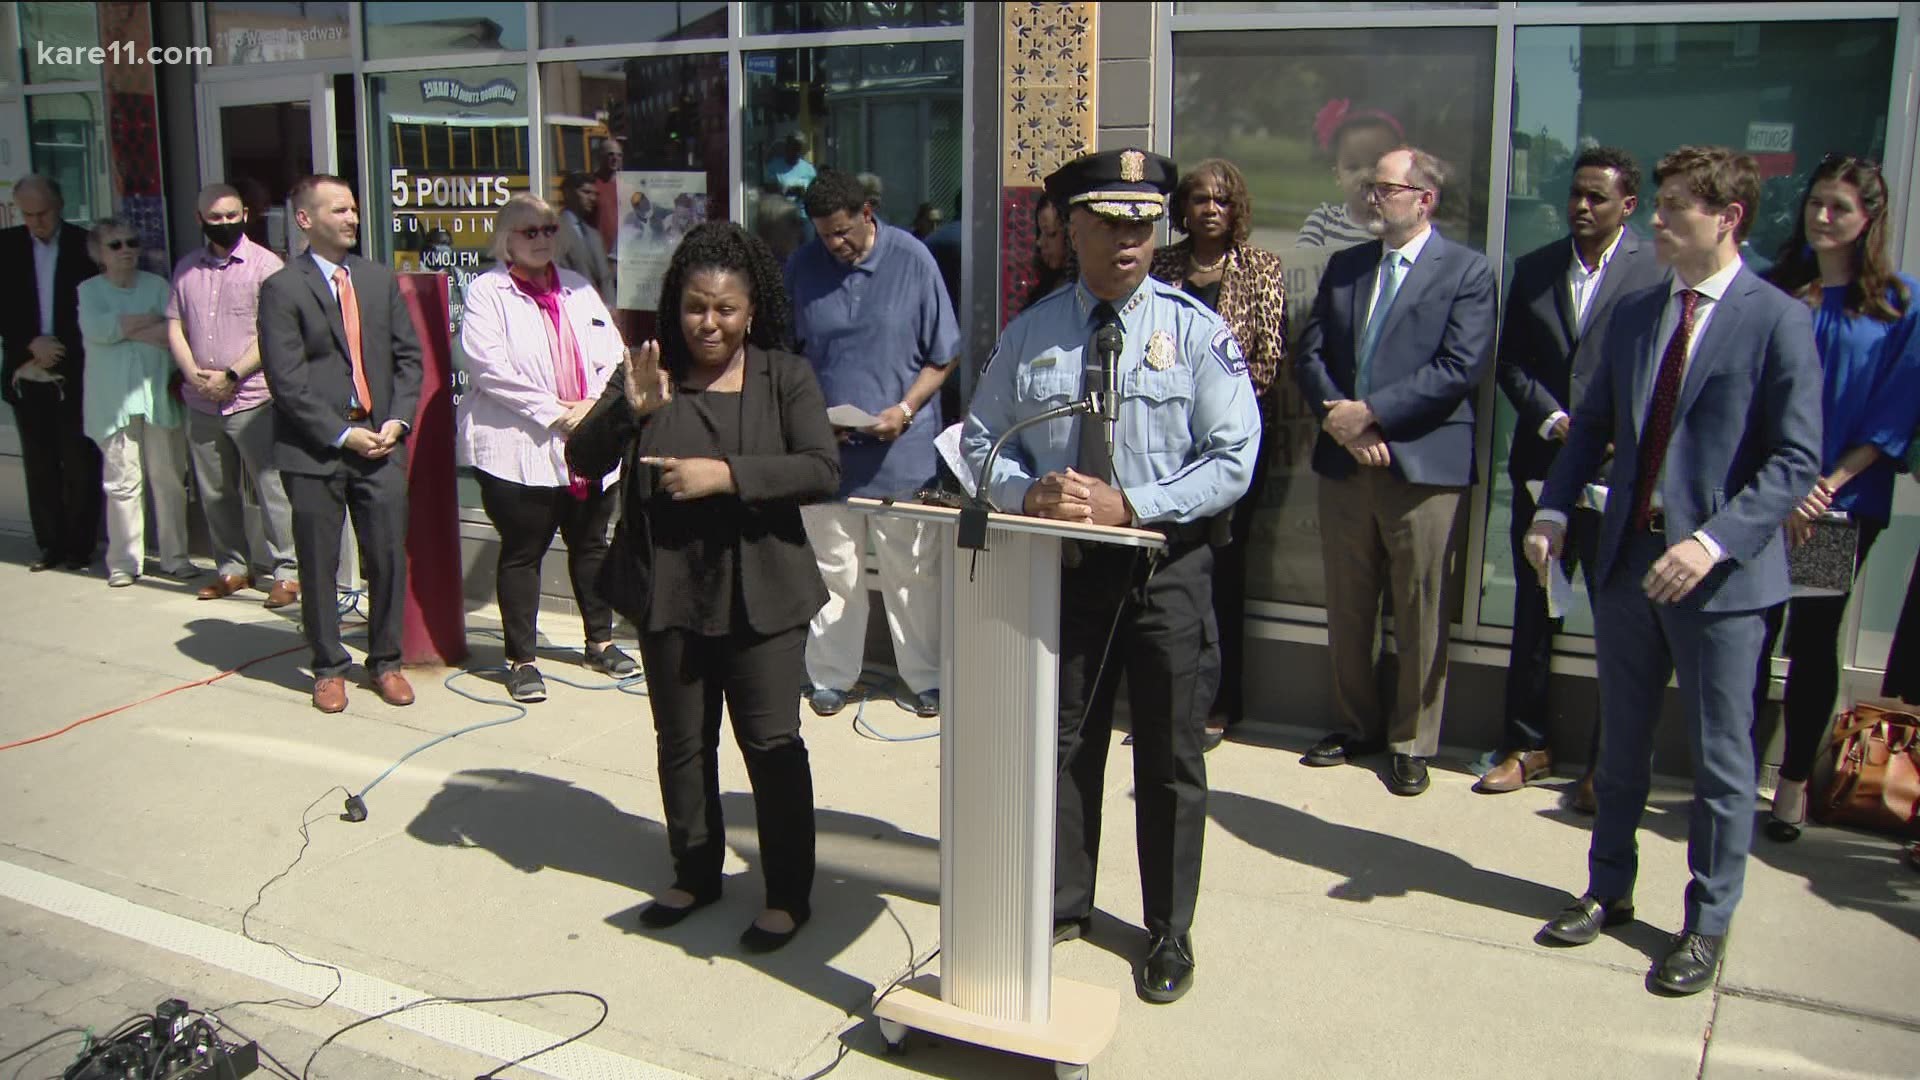 The mayor and police chief held a news conference with other city leaders to announce a new plan for addressing violent crime and police accountability.